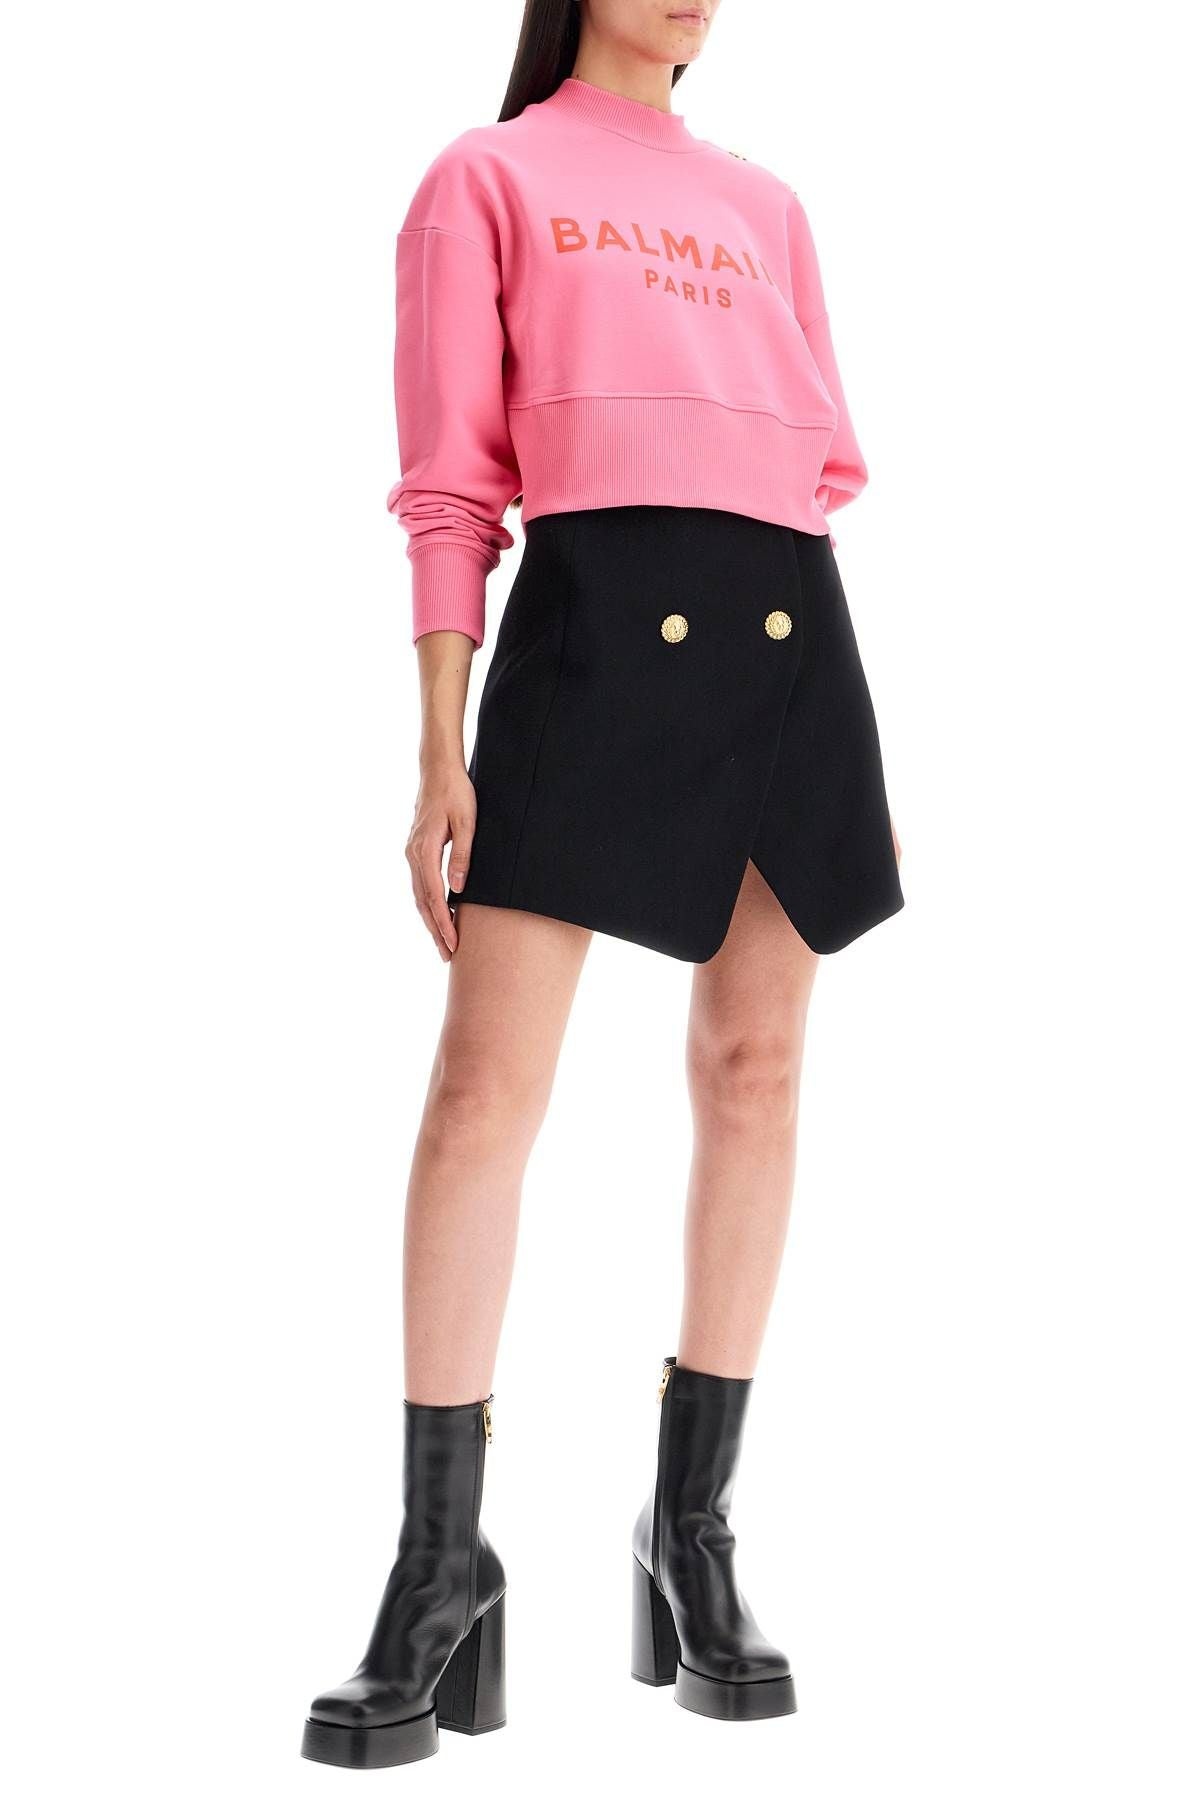 Balmain Cropped Sweatshirt With Buttons - 2